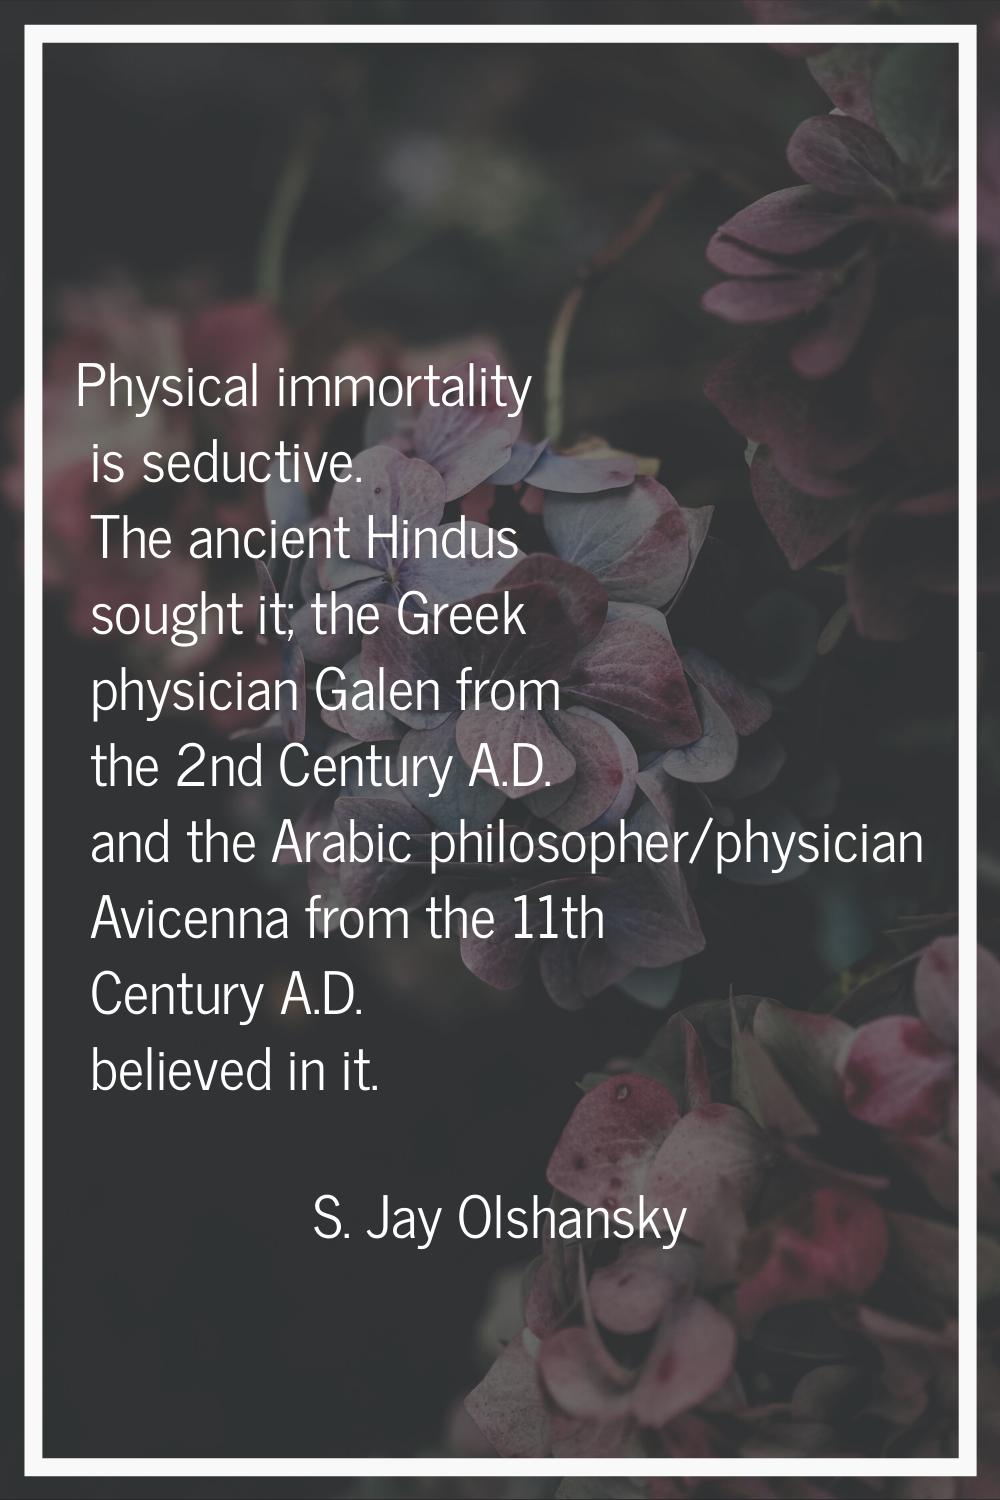 Physical immortality is seductive. The ancient Hindus sought it; the Greek physician Galen from the